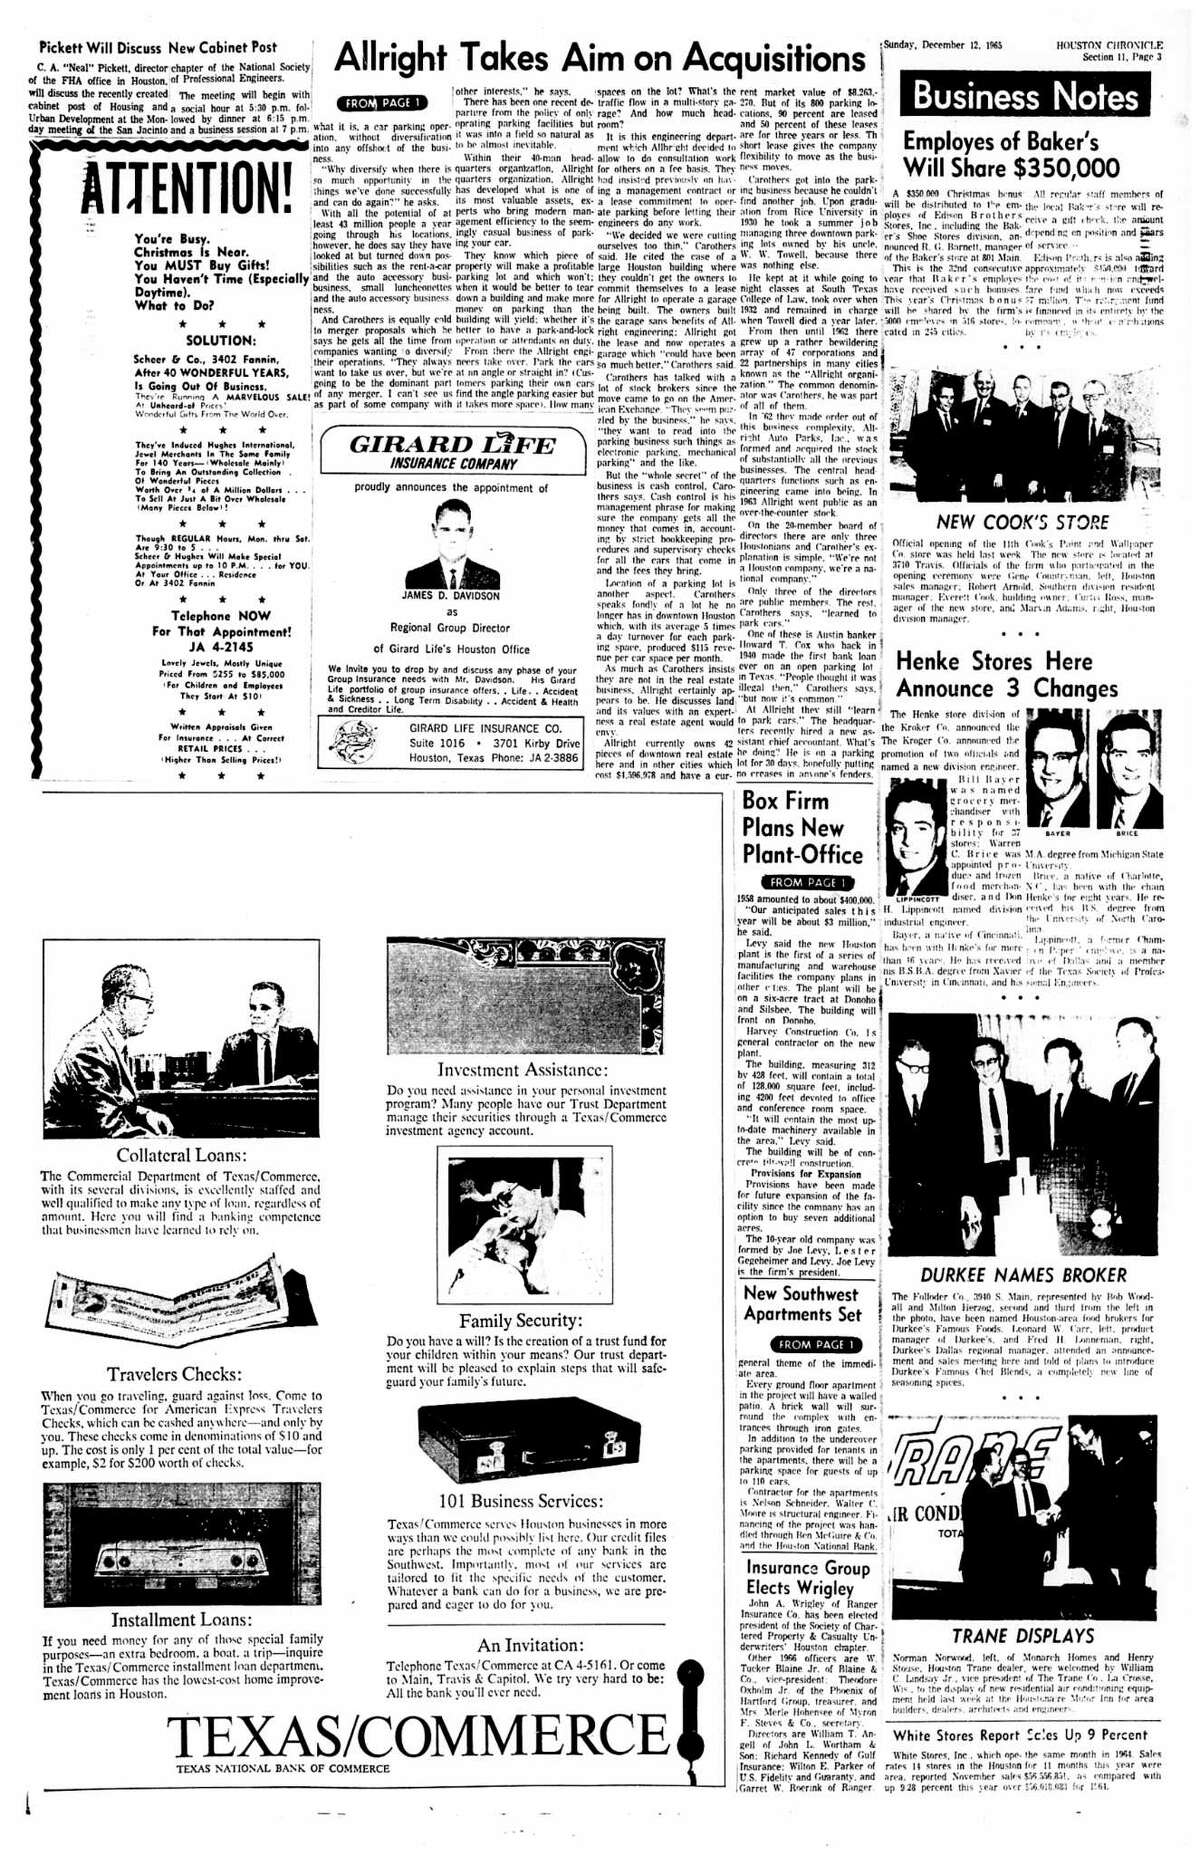 Houston Chronicle inside page - December 12, 1965 - section 11, page 2. Allright Takes Aim at Acquisitions